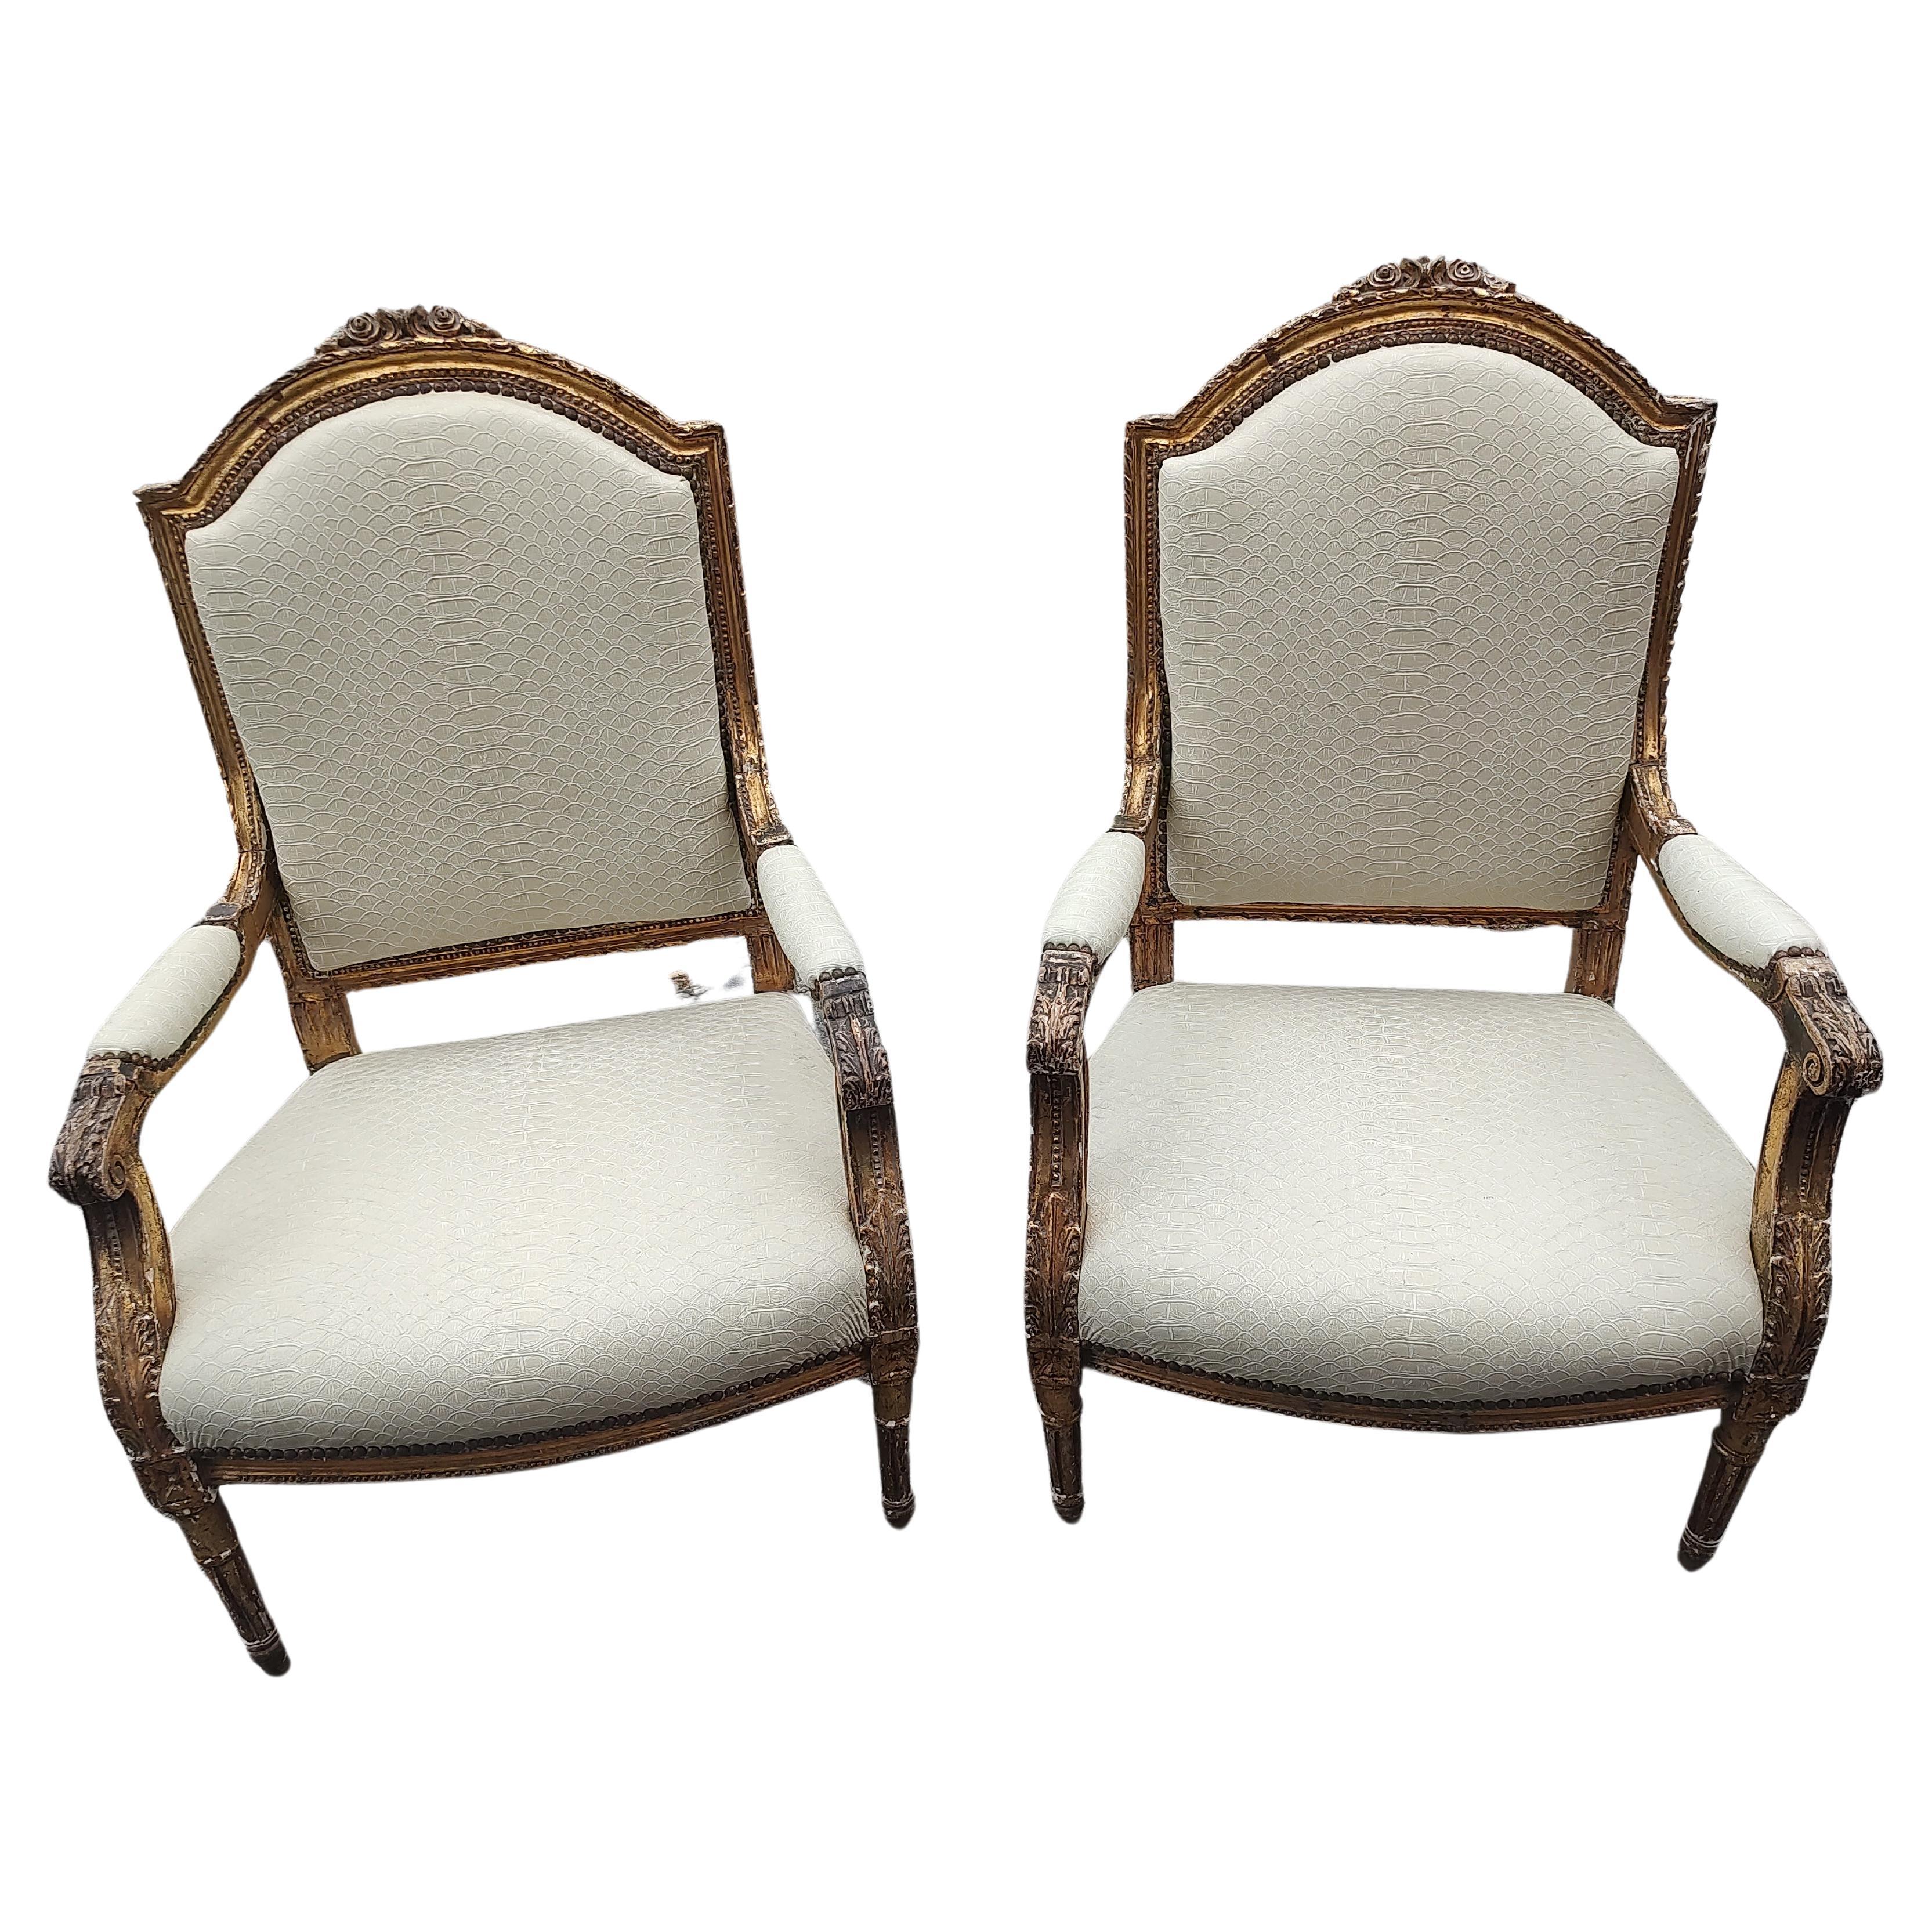 Pair of Mid 18th Century Gilt French Armchairs Fauteuils For Sale 7